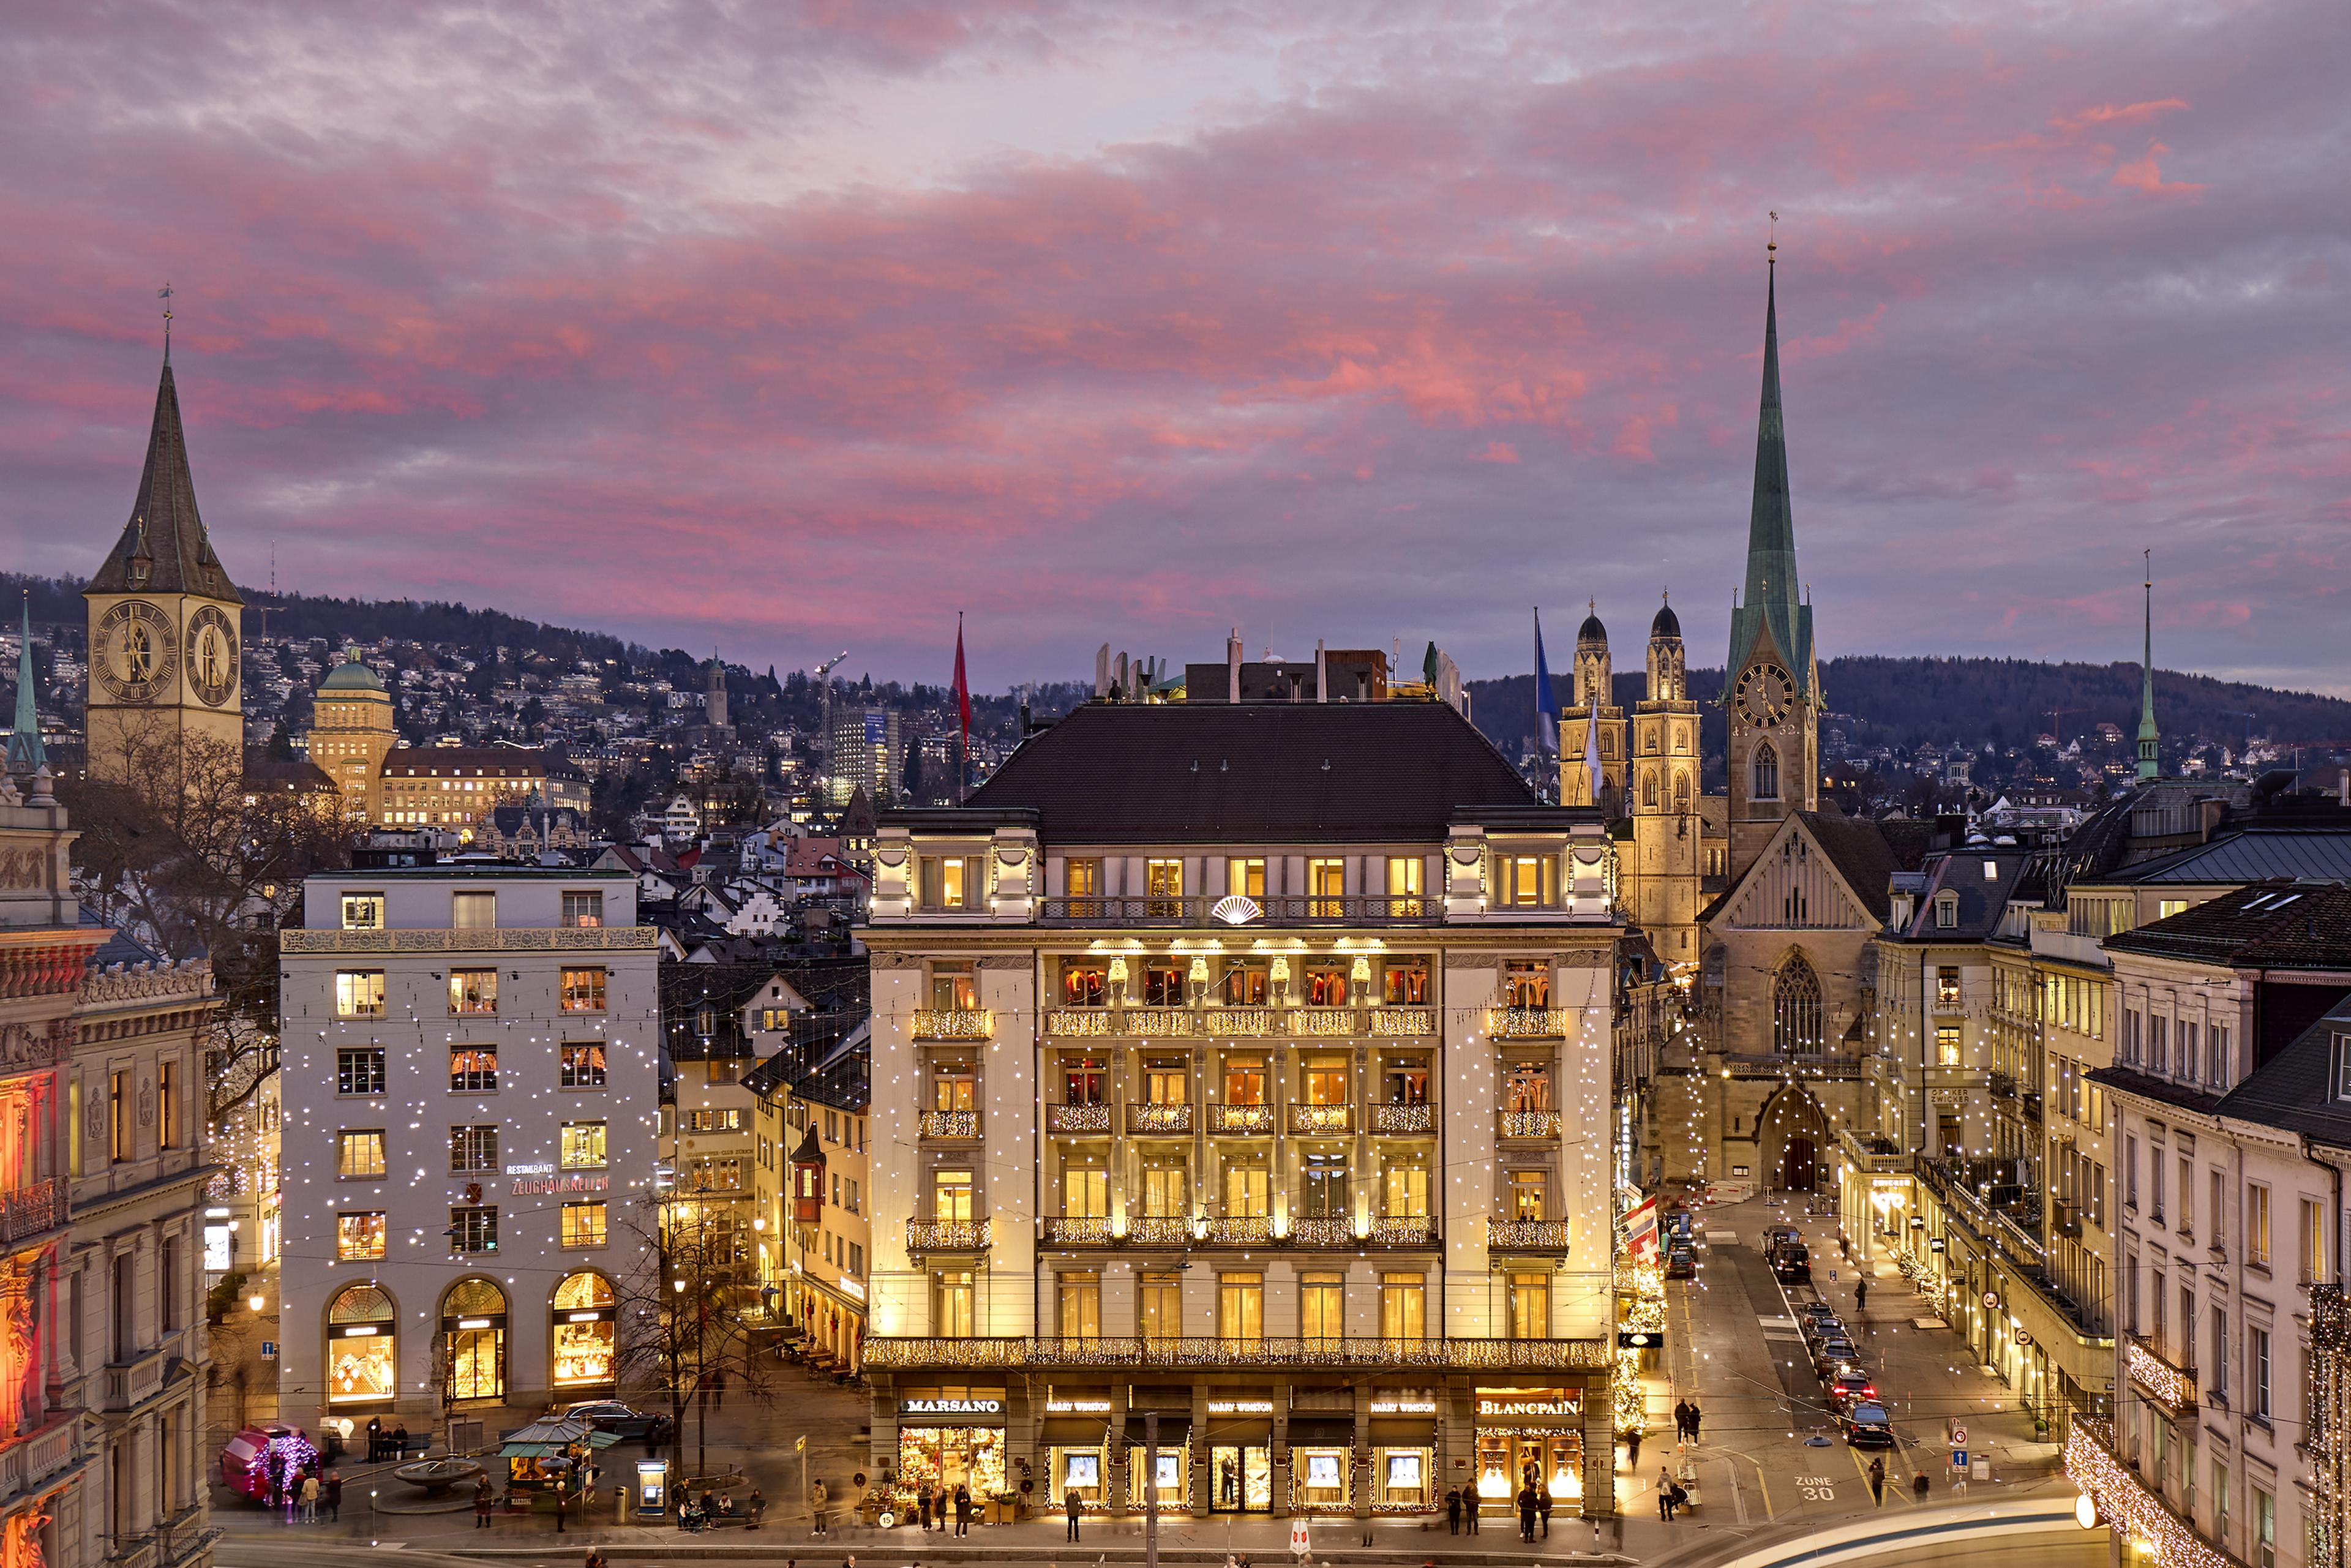 looking at grand hotel building at dusk from across a plaza, with european city Zurich in the background